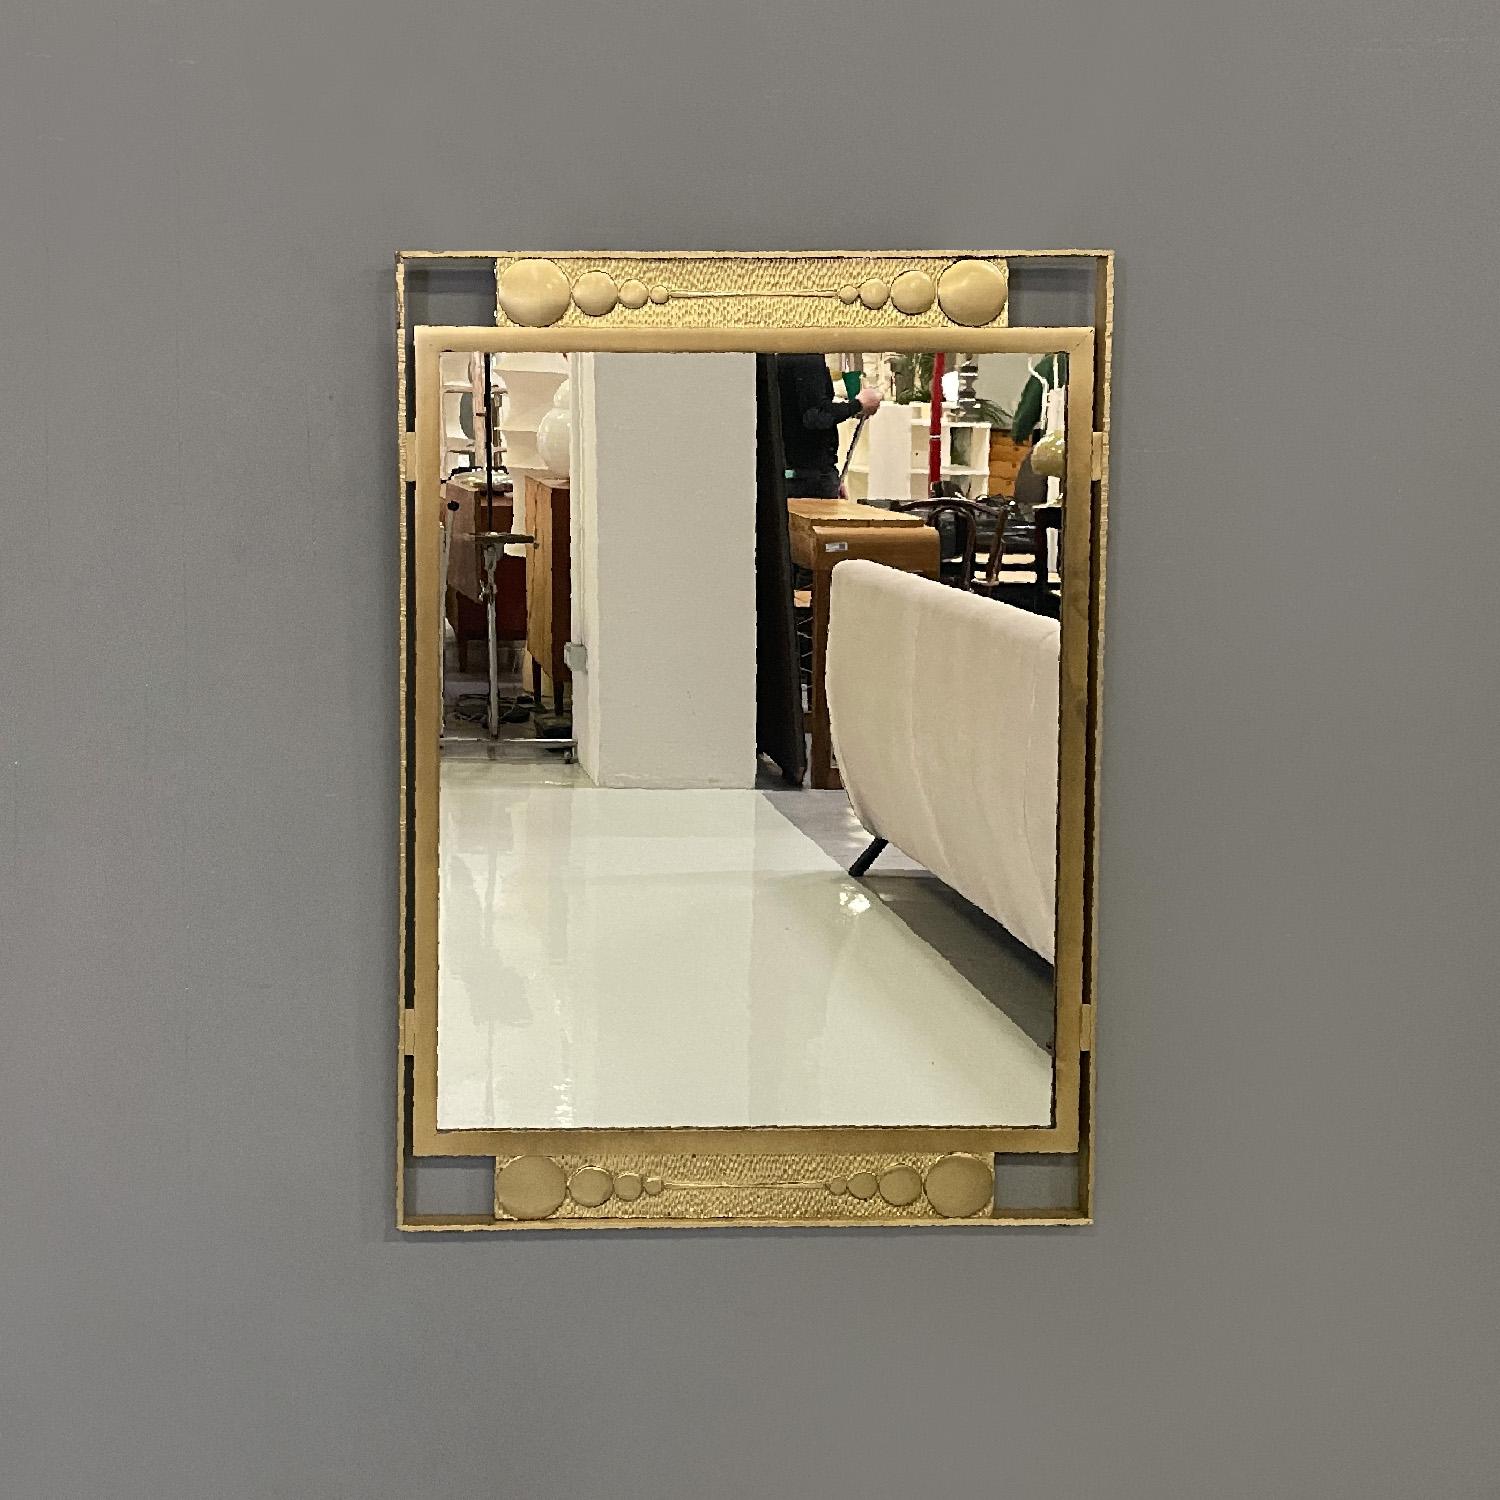 Italian modern wall mirror in golden metal with geometric decorations, 1980s
Rectangular wall mirror. It features a gold metal frame with geometric decorations in the upper and lower central parts of the frame.
1980s.
Good condition, it has